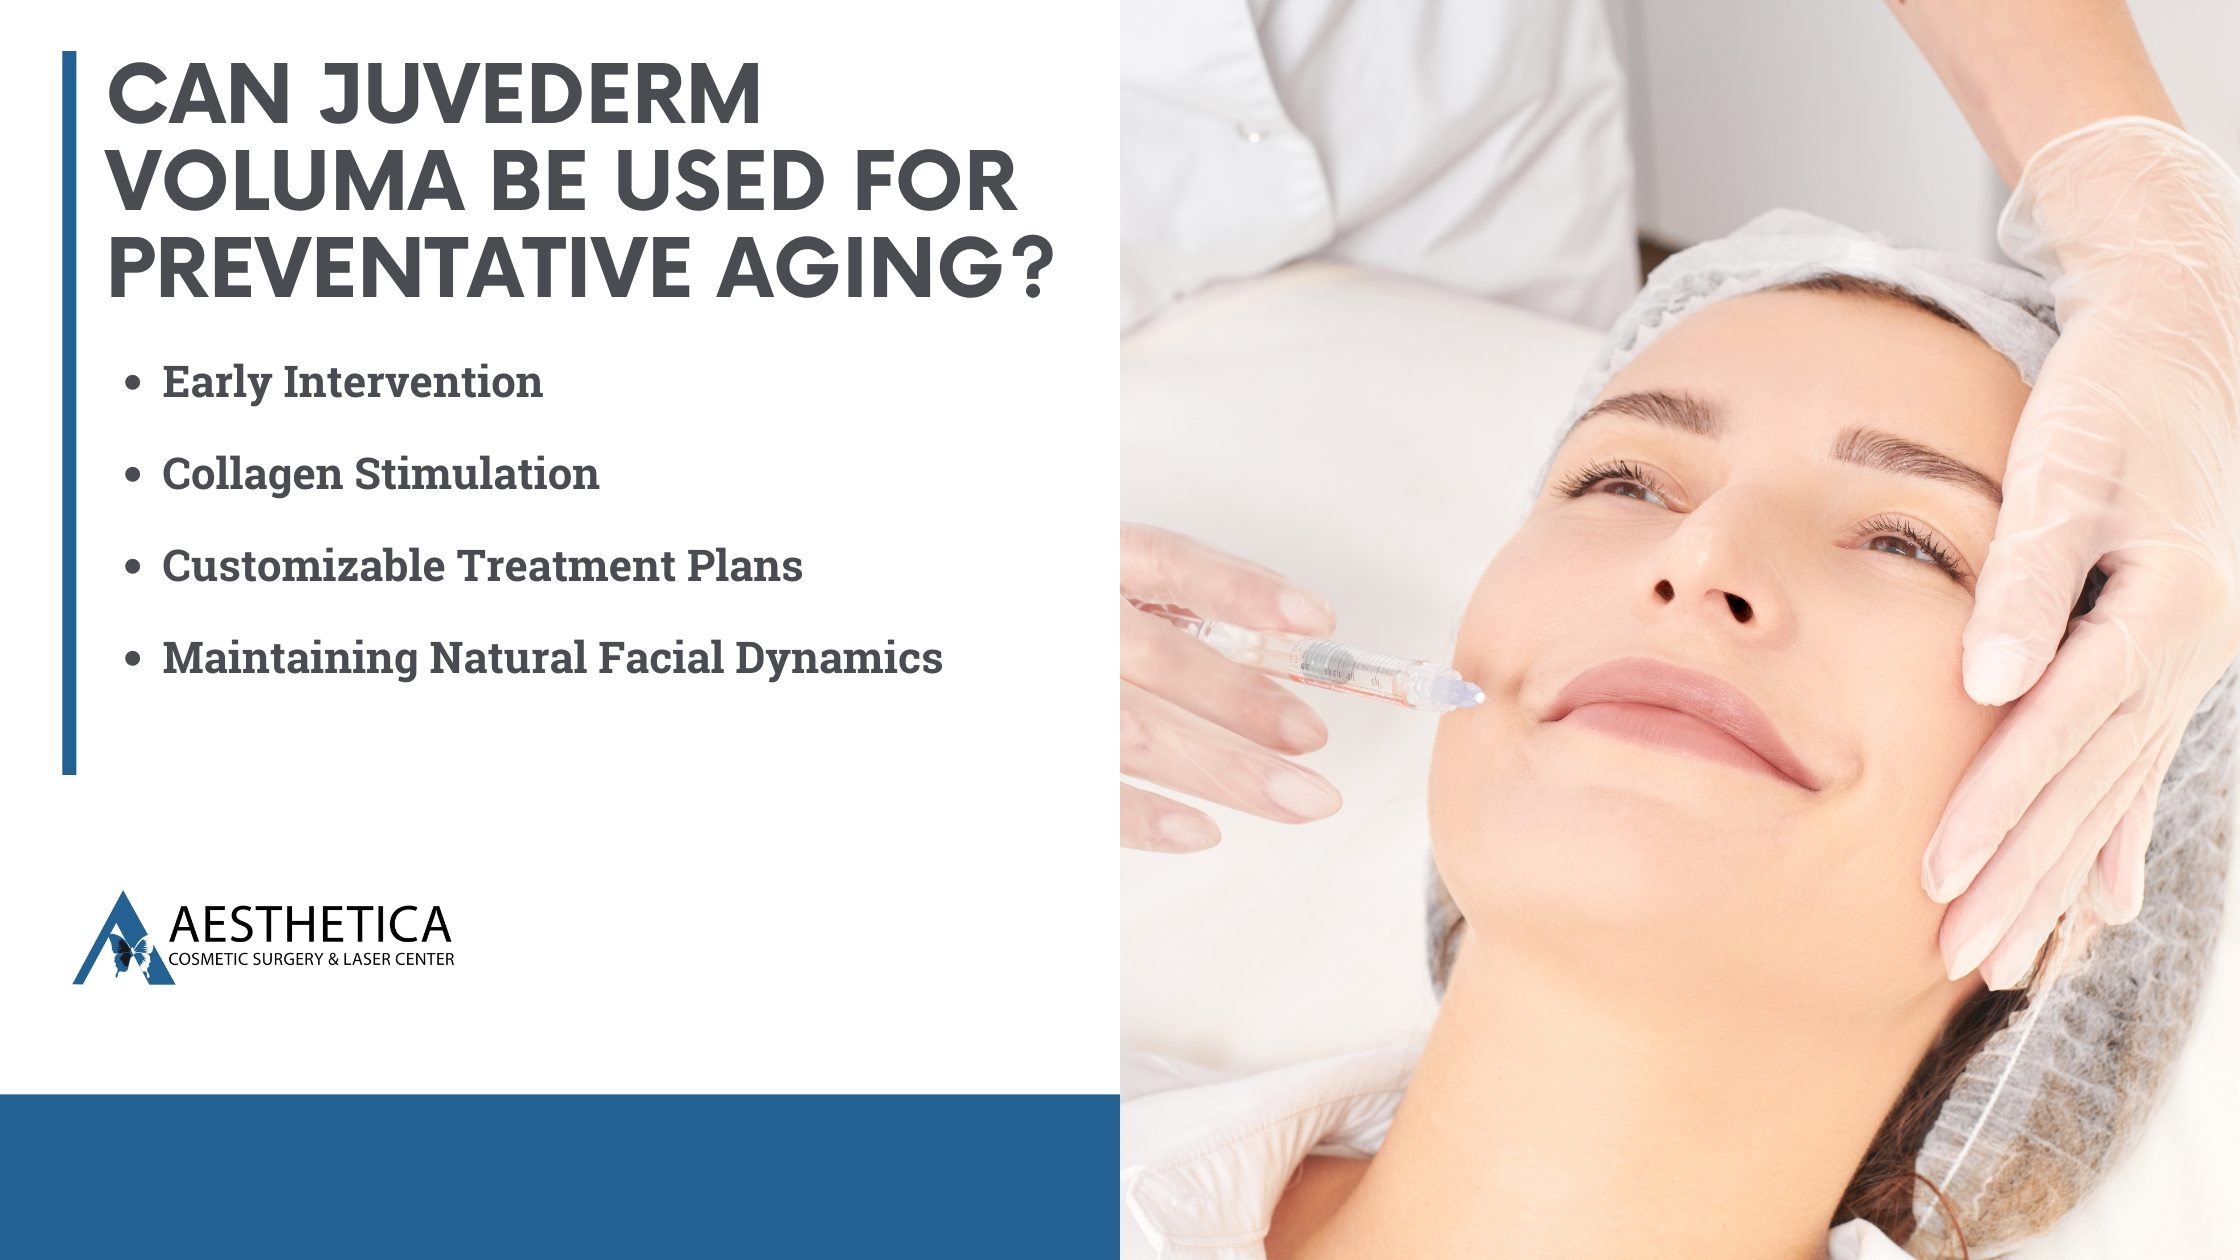 Can Juvederm Voluma Be Used for Preventative Aging?